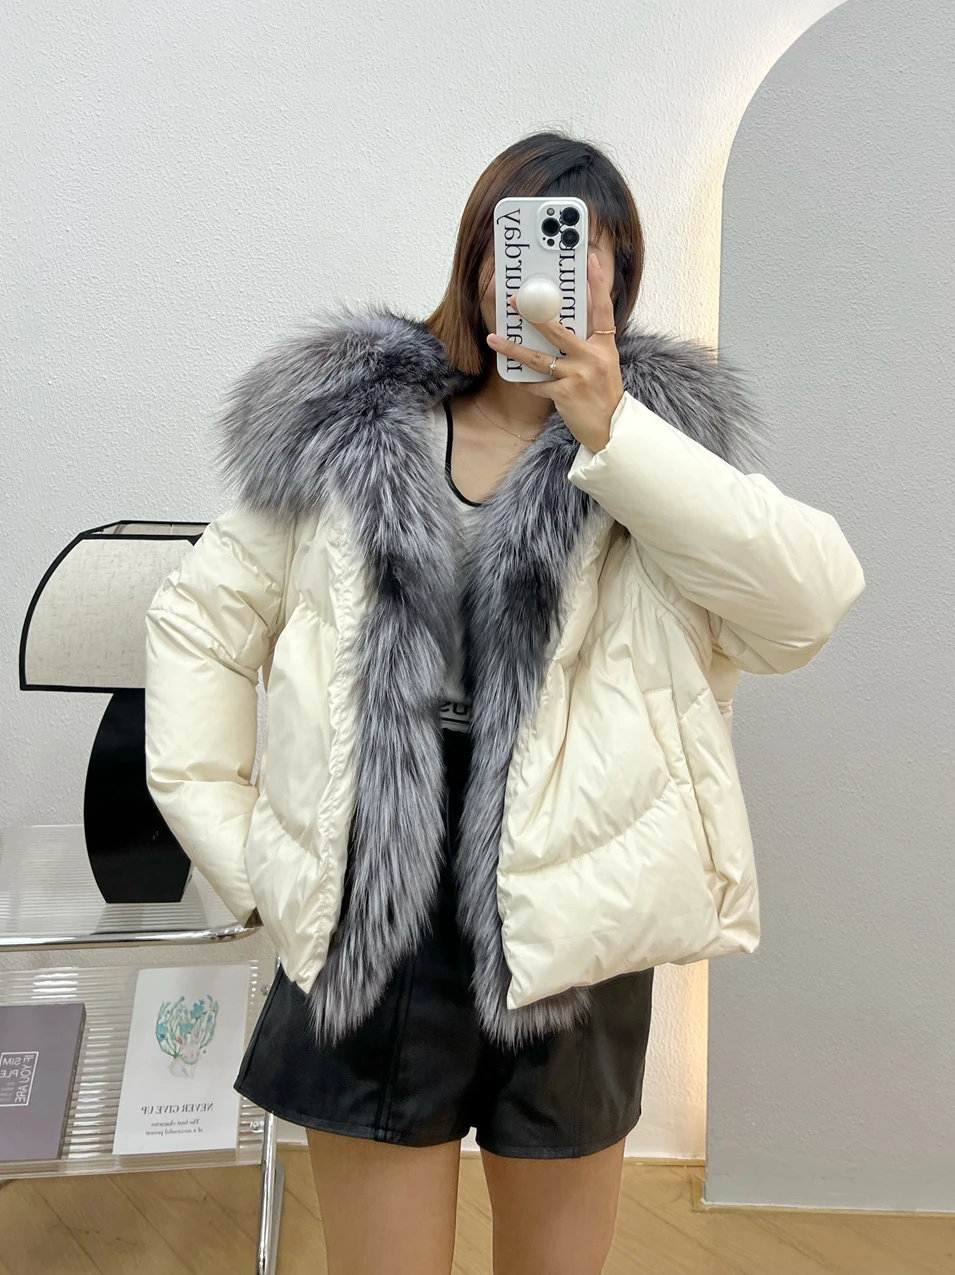 Furyoume High-end Winter Coat Women Thick White Duck Down Jacket Long Real Large Silver Fox Fur Collar Warm Outerwear Luxury enlarge